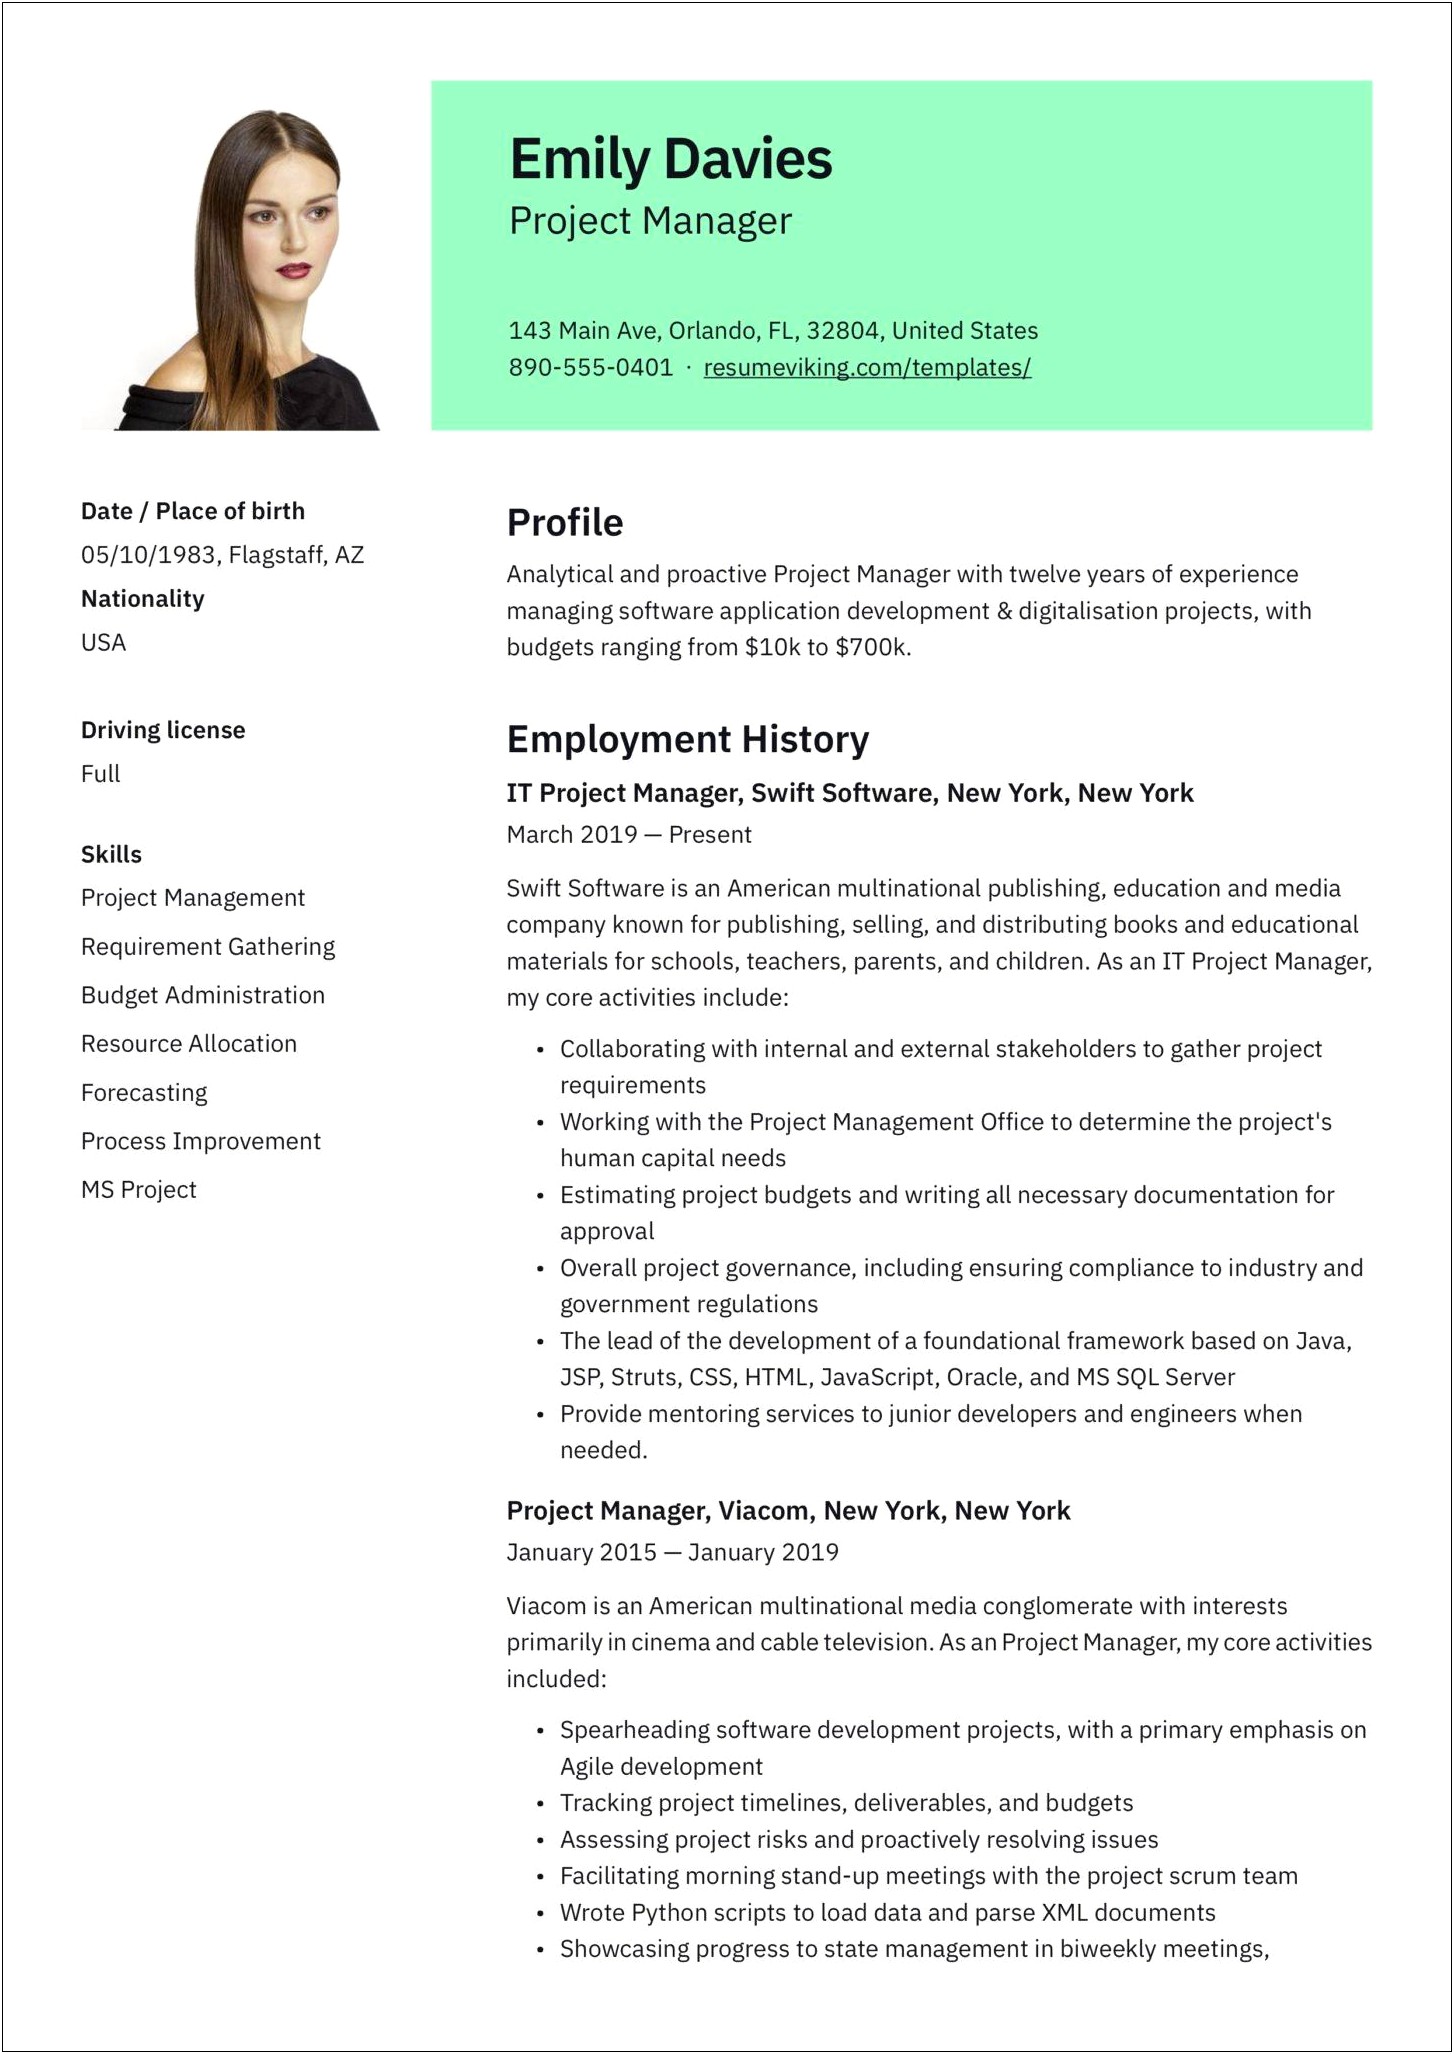 Professional Resume Format For Project Manager